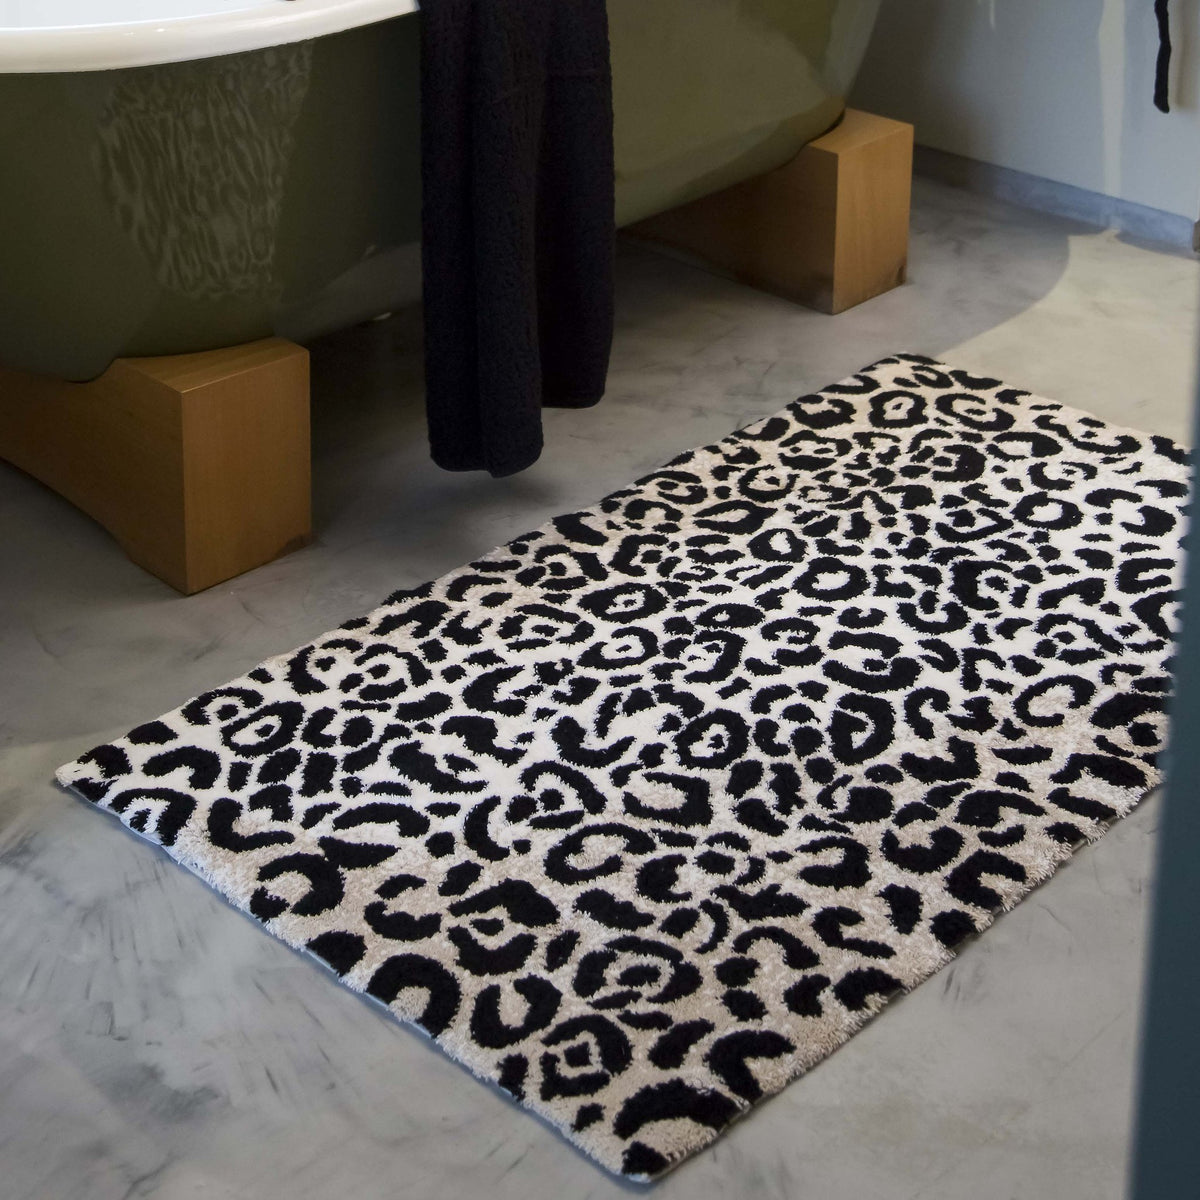 Abyss Habidecor Leopard Bath and Area Rugs Lifestyle 3 Fine Linens